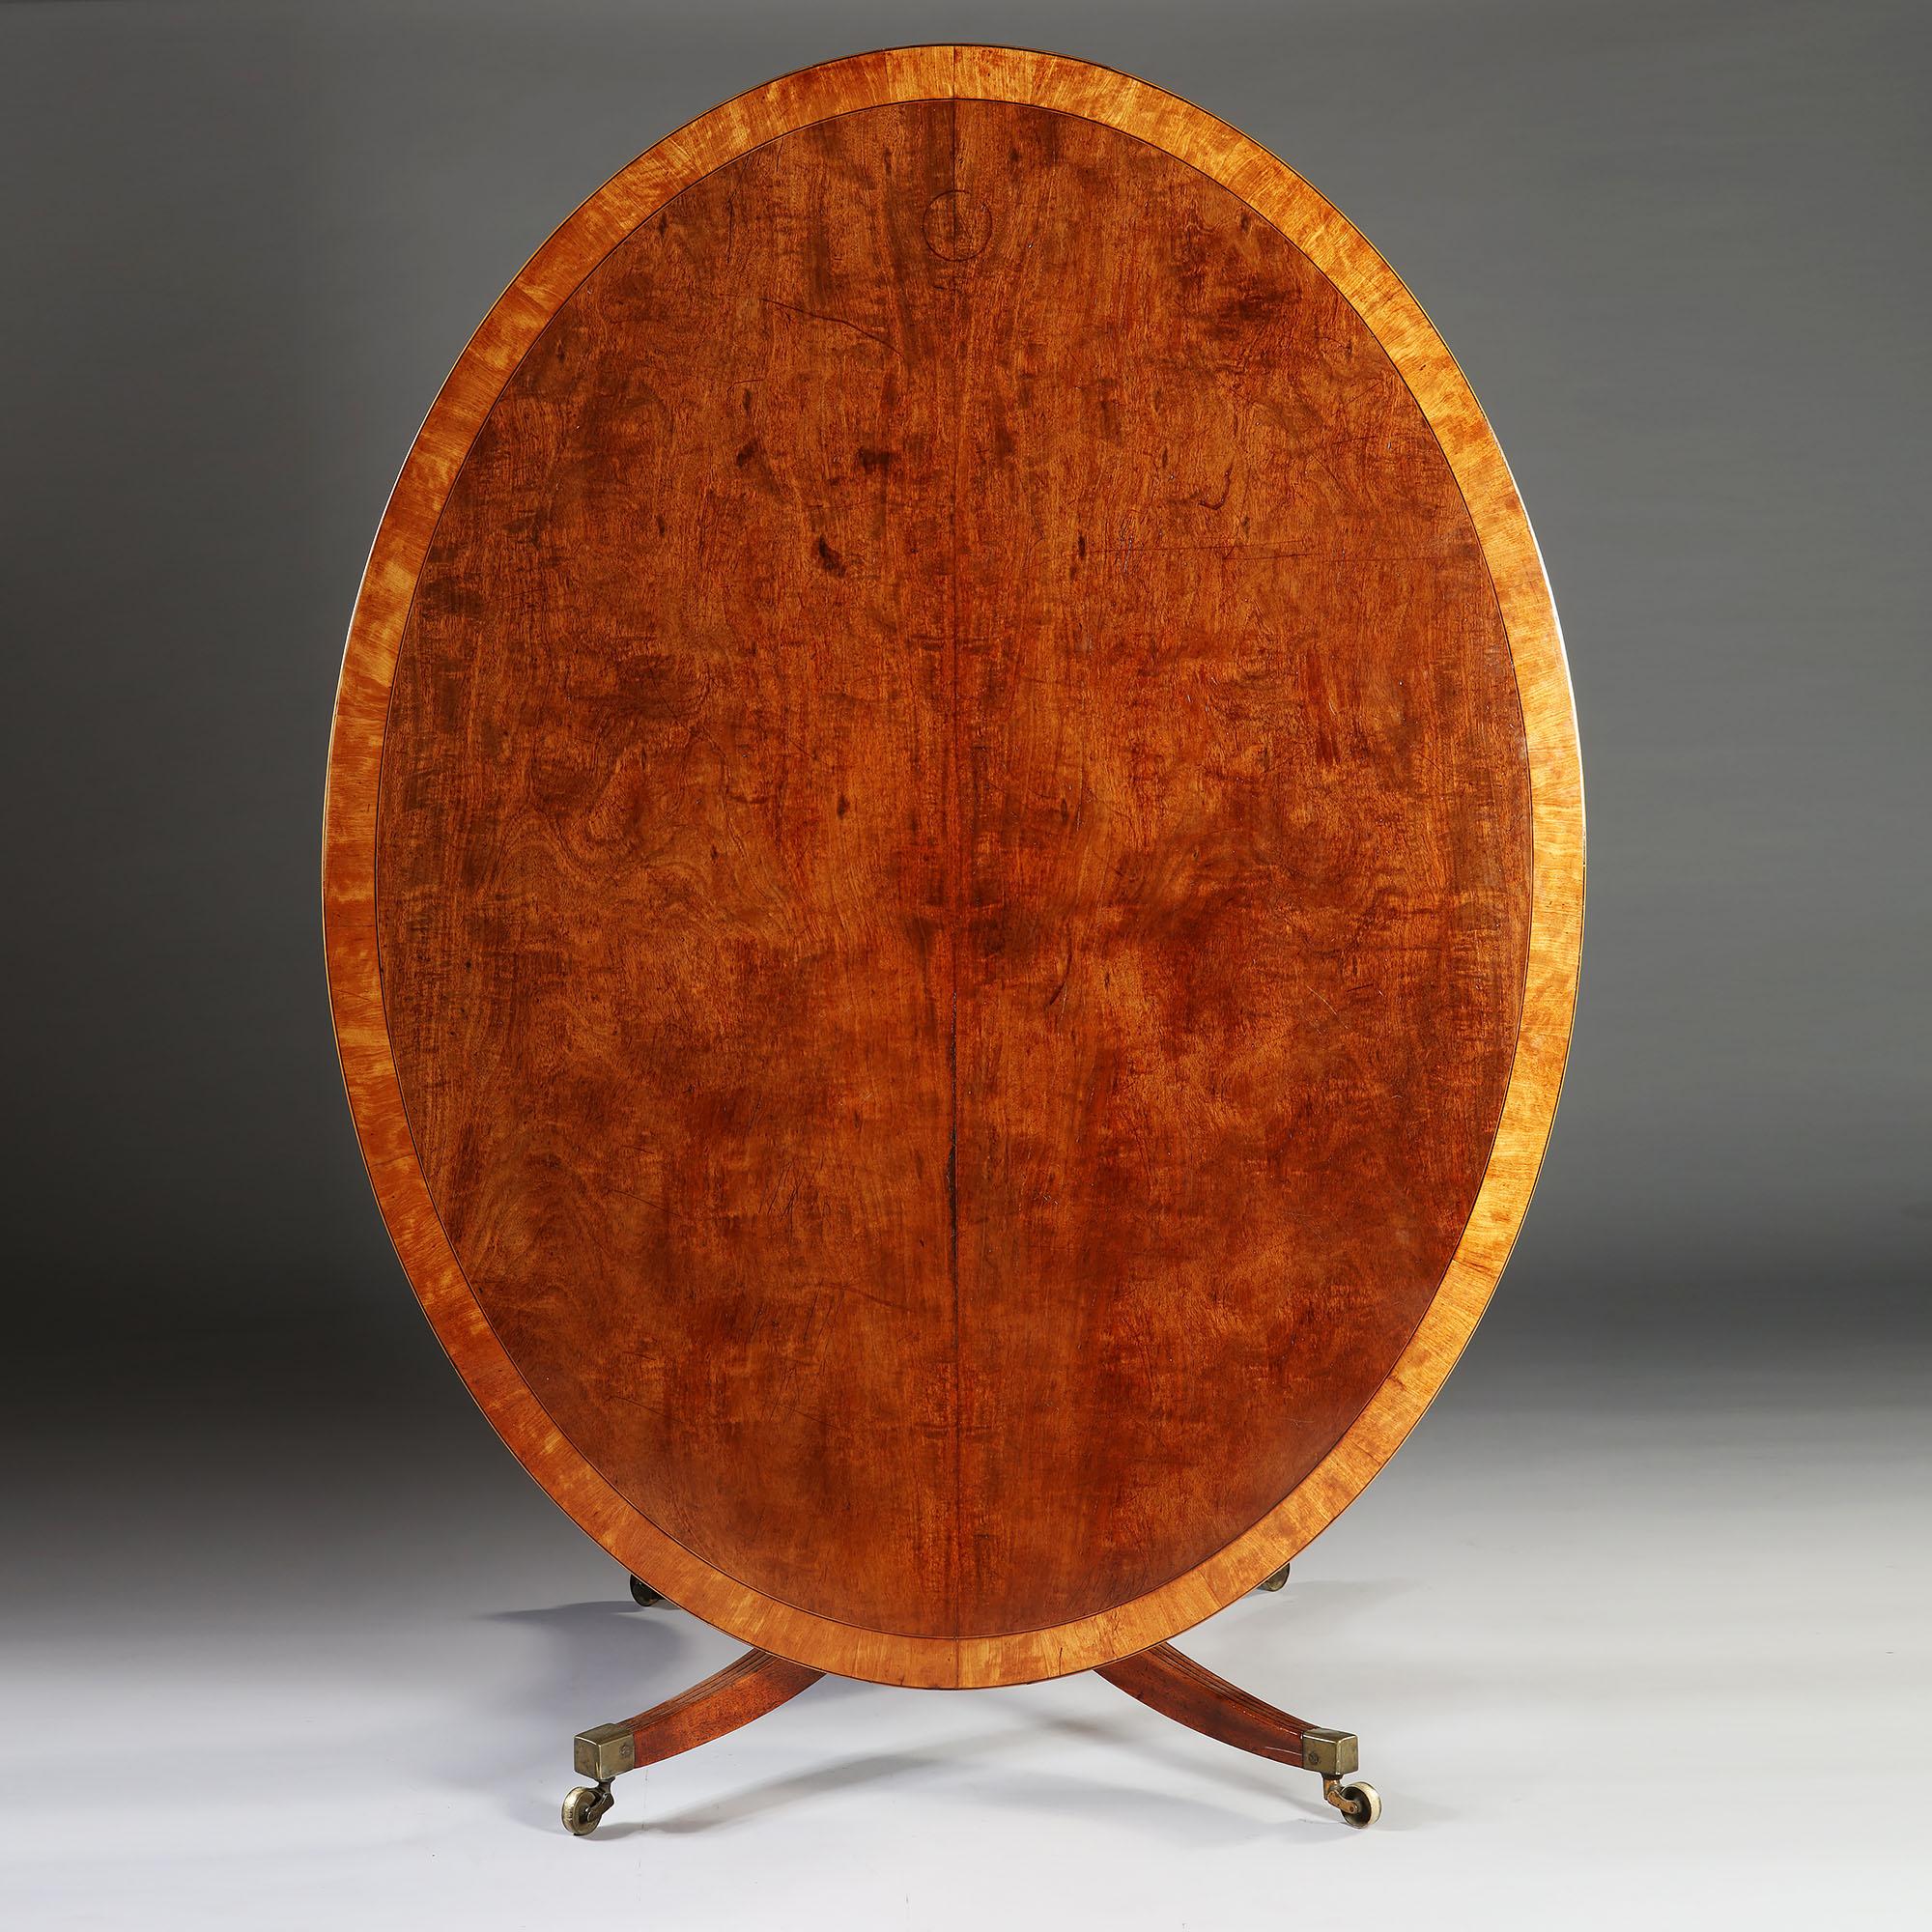 A large mahogany oval breakfast table with highly figured tilt top, including an inlaid border, resting on four fluted legs terminating in brass castors.